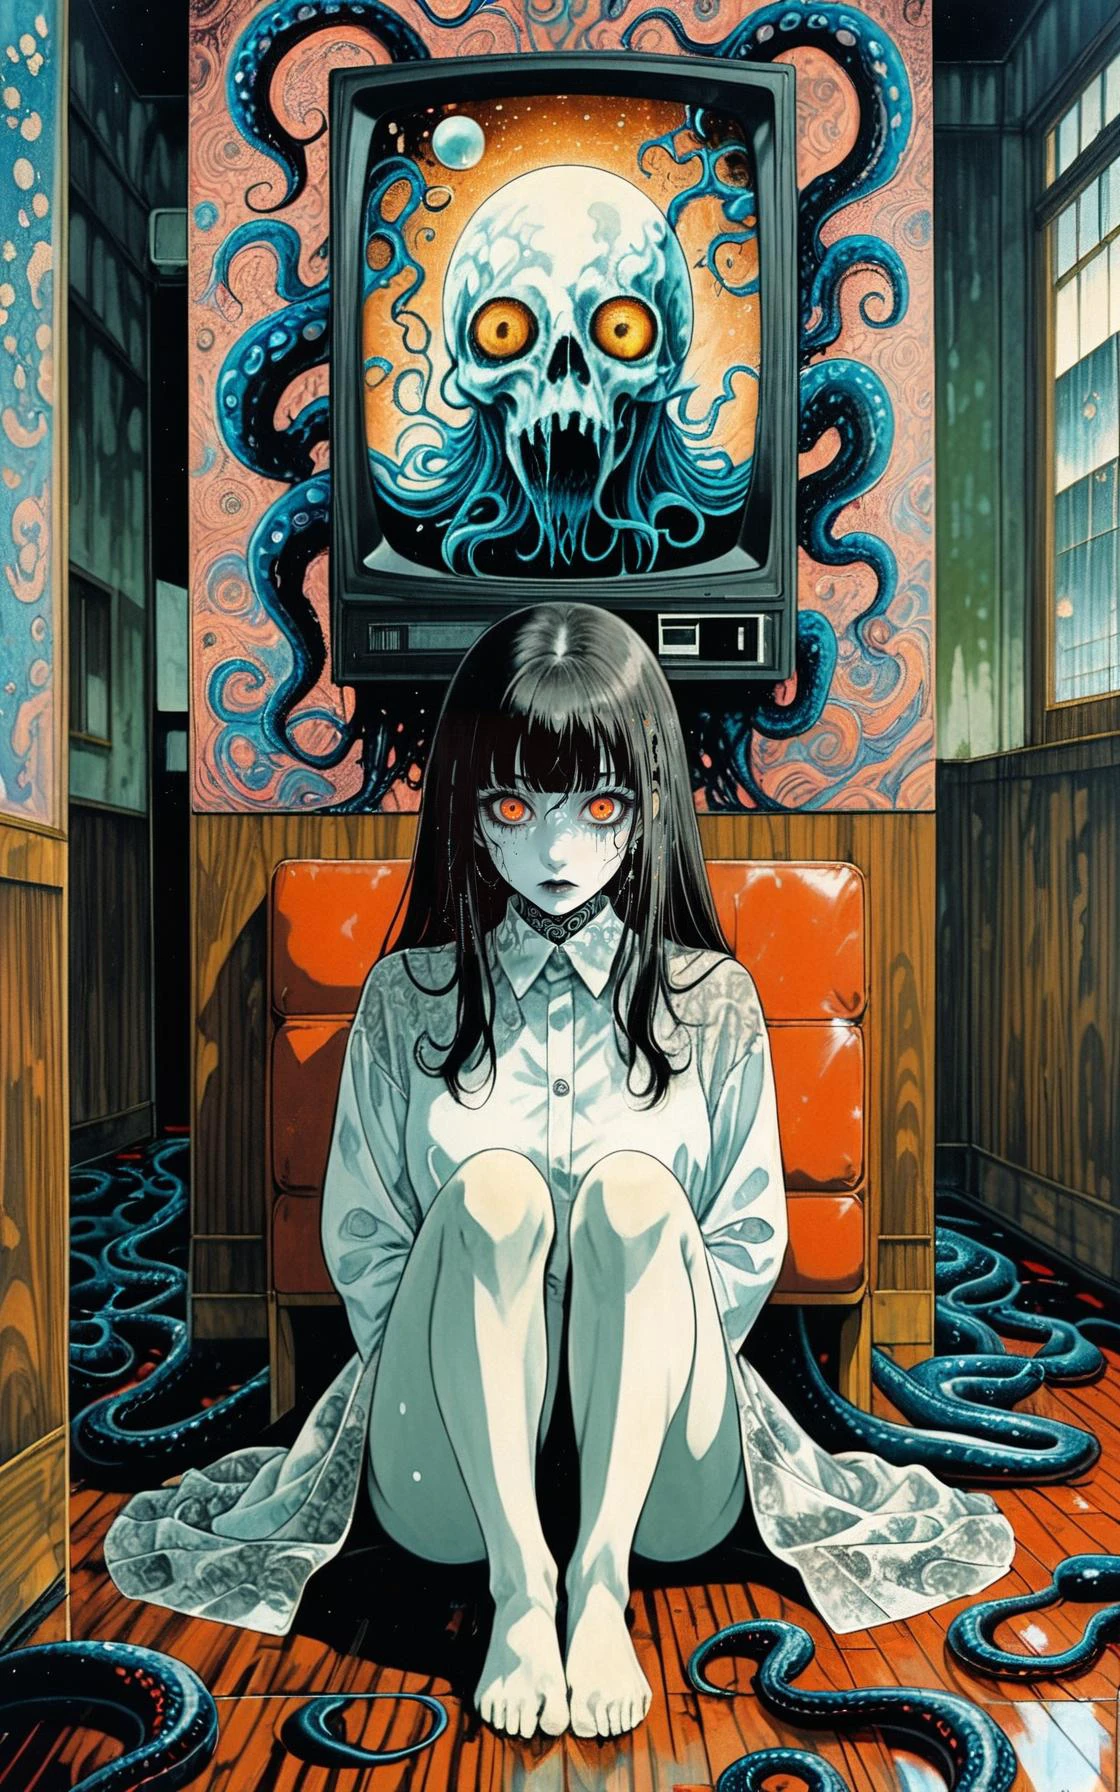 Japanese mangahorror-themed lovecraftian horror Junji_Ito,Takato_Yamamoto and Hisui Sugiura,analogue vhs distortion,The Frost of 80s style,anime 1girl_sitting(solo),Intricate and vivid depiction of Junji Ito's work in film form,intricately detailed linework,vibrant colors,from the detailed linework and vibrant colors to the subtle analogue VHS distortion,The image captures a girl in her natural habitat,surrounded by intricate details that bring the scene to life,Tentacles protruding from many holes in the floorHyperrealism,an excellent job in capturing the essence of this iconic artist's work,white_shirt,cosmic horror,mysterious,unsettling,dark art,spooky,suspenseful,grim,cucoloris patterned illumination,
Hypermaximalist,Megapixels,Super-Resolution,(Intricate Details/Insane Details/Hyper-detailed)